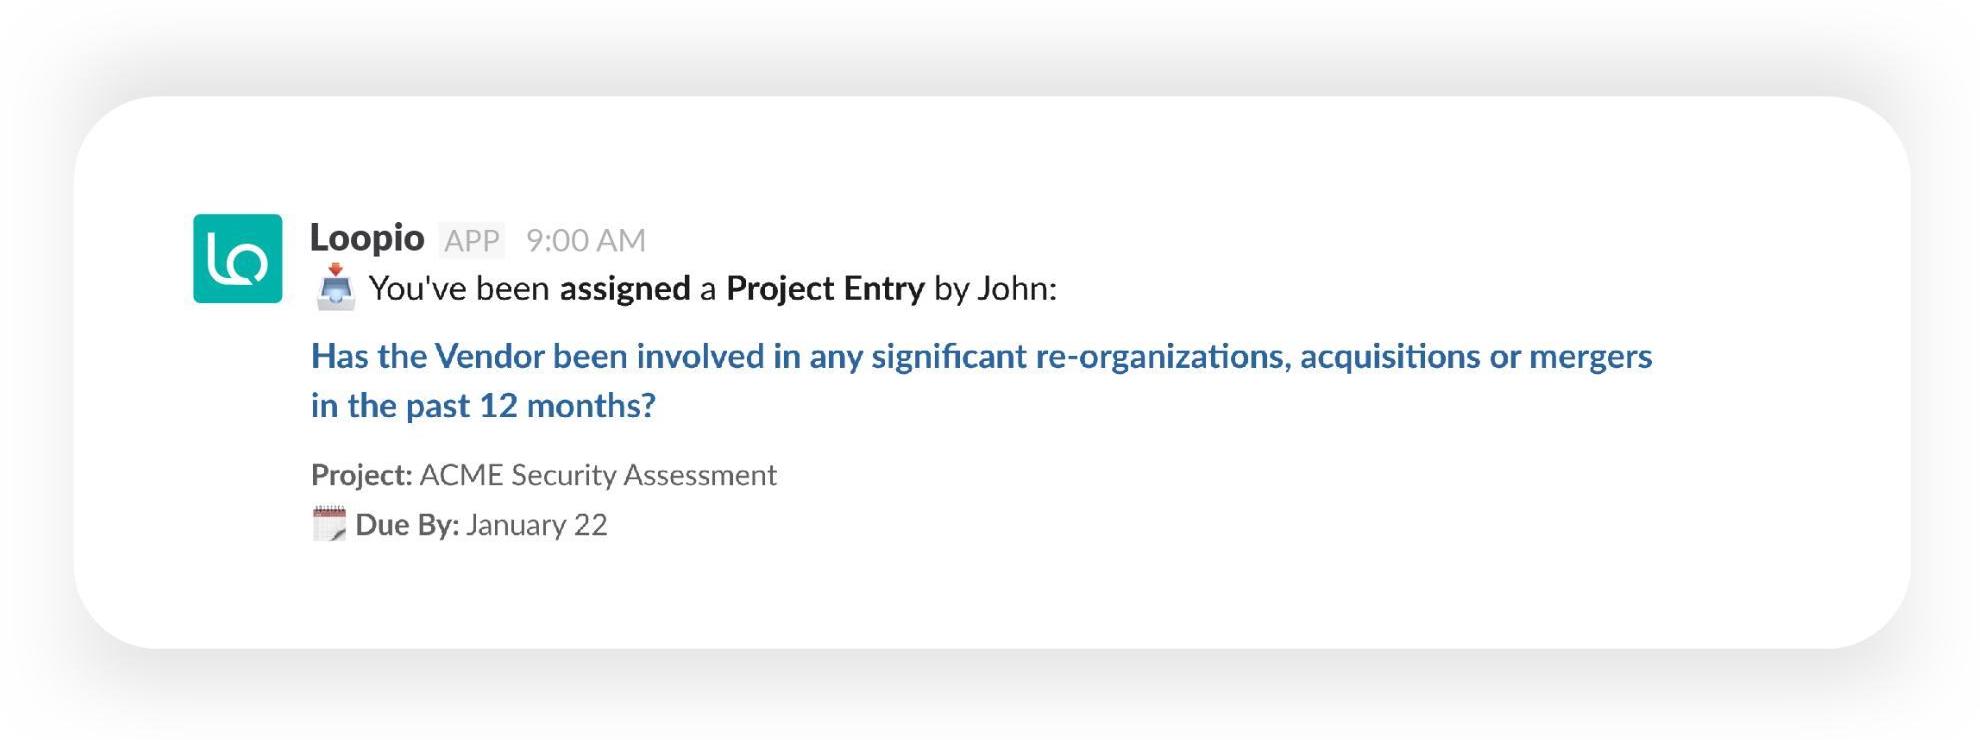 Slack Notification from Loopio–"You've been assigned a project entry by John."